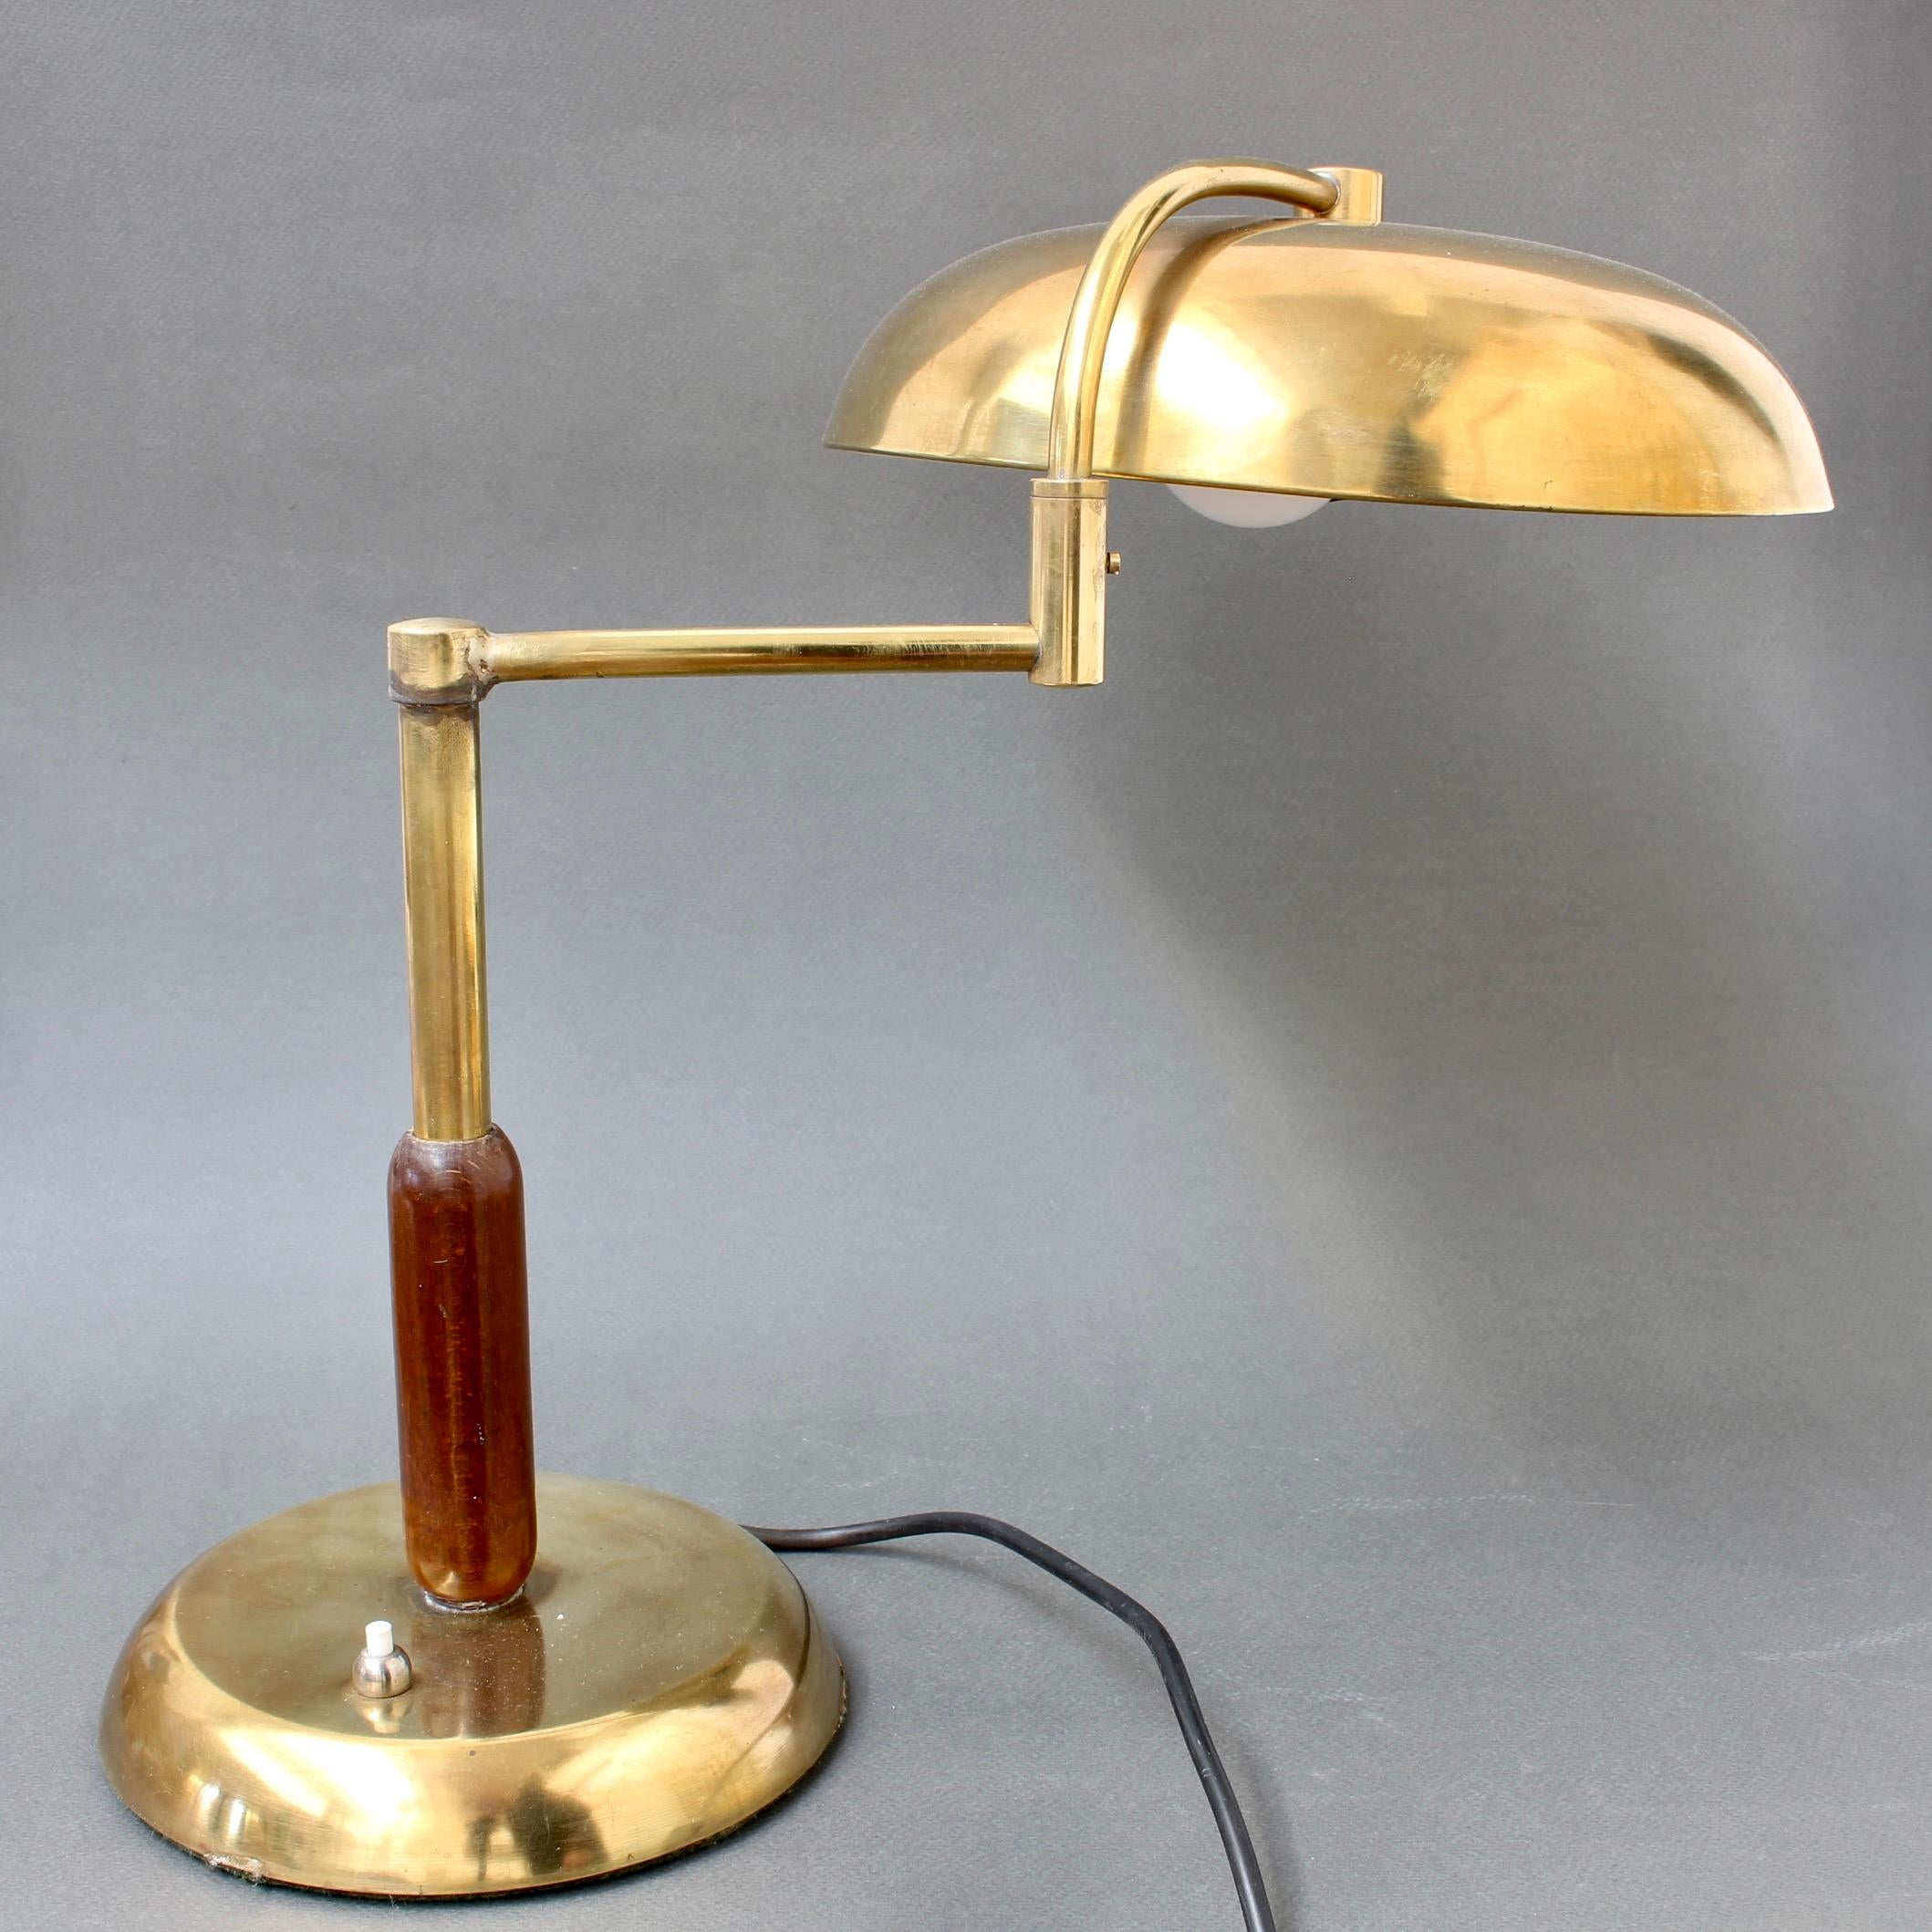 Mid-20th Century Italian Mid-Century Brass Table Lamp with Swivel Arm, circa 1950s For Sale